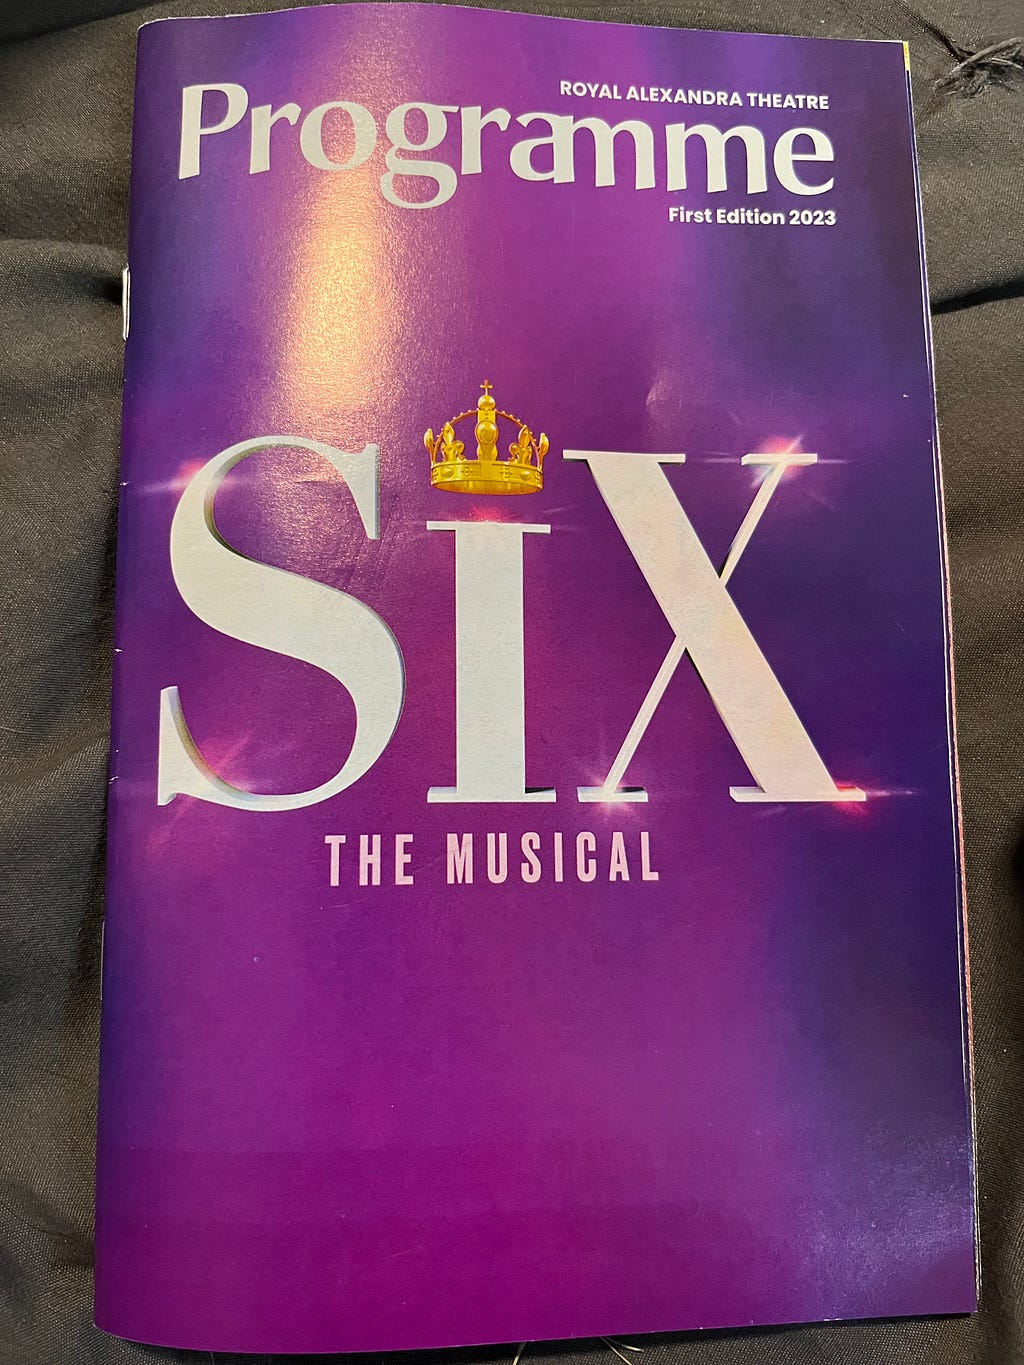 A programme for SIX The Musical. The show’s title is printed in white letters on a purple background, with a gold crown above the I. Additional text in white states that it is a programme, that the show is presented at the Royal Alexandra Theatre, and that it is First Edition 2023.